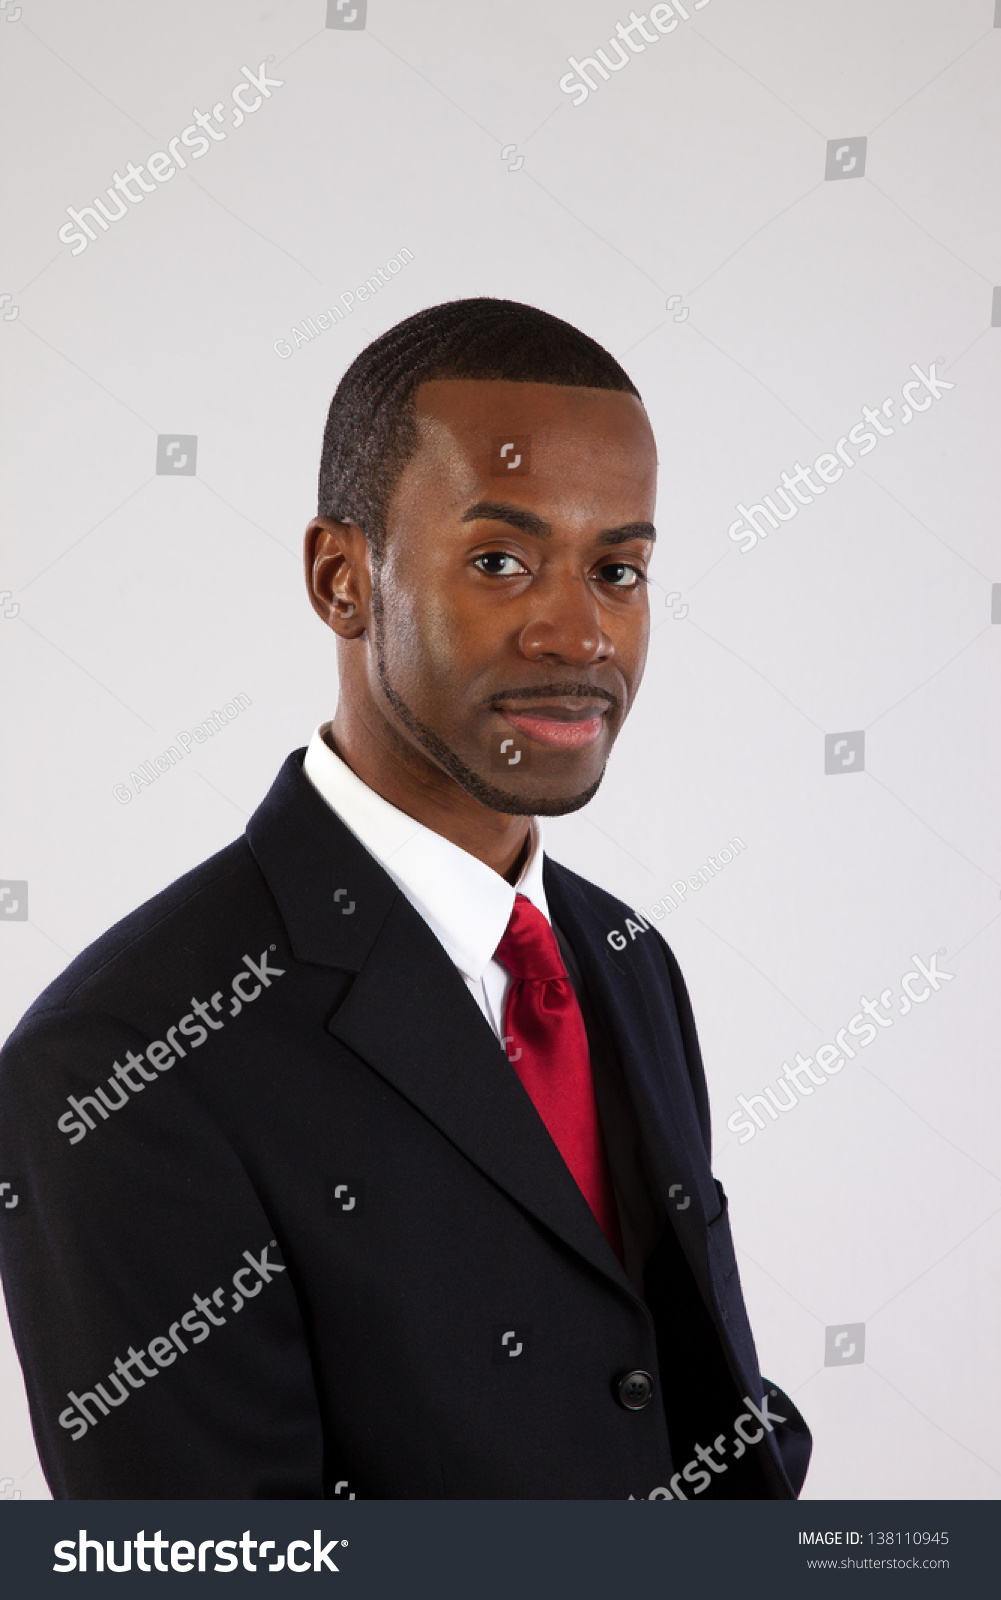 Handsome Black Businessman Looking At The Camera With A Smirk Of A ...